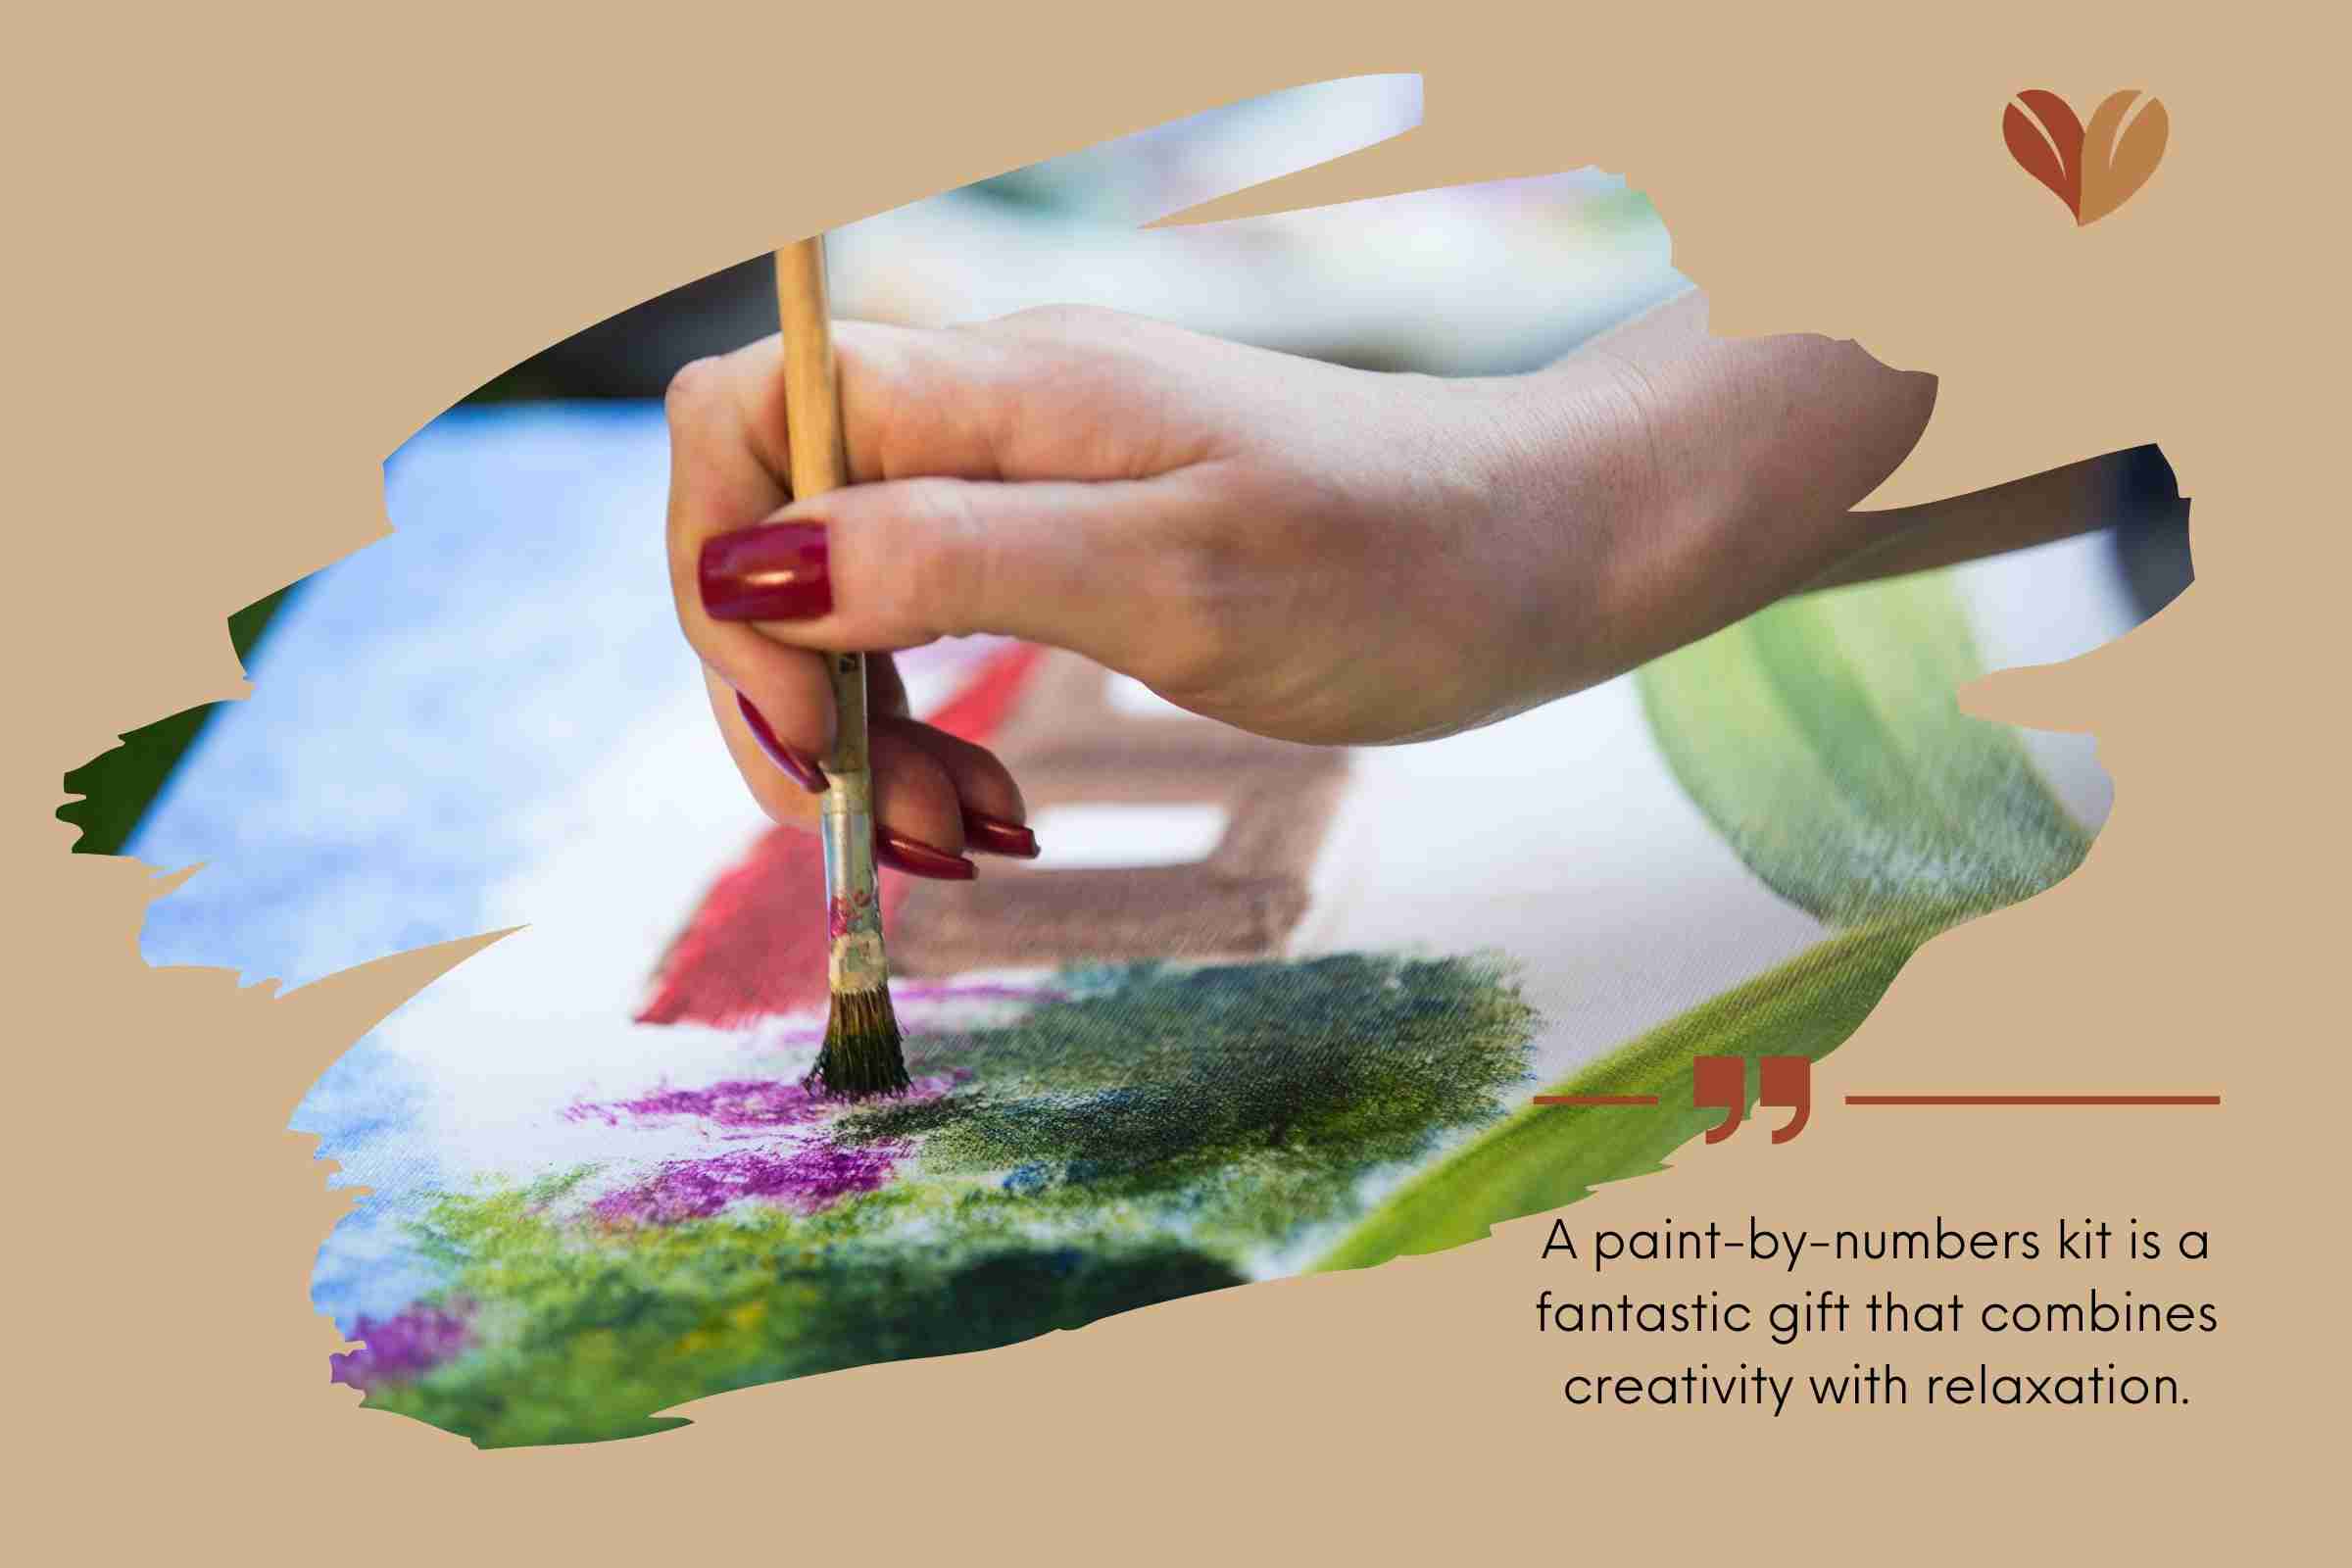 A paint-by-numbers kit is a fantastic gift for long-distance boyfriends that combines creativity with relaxation. 